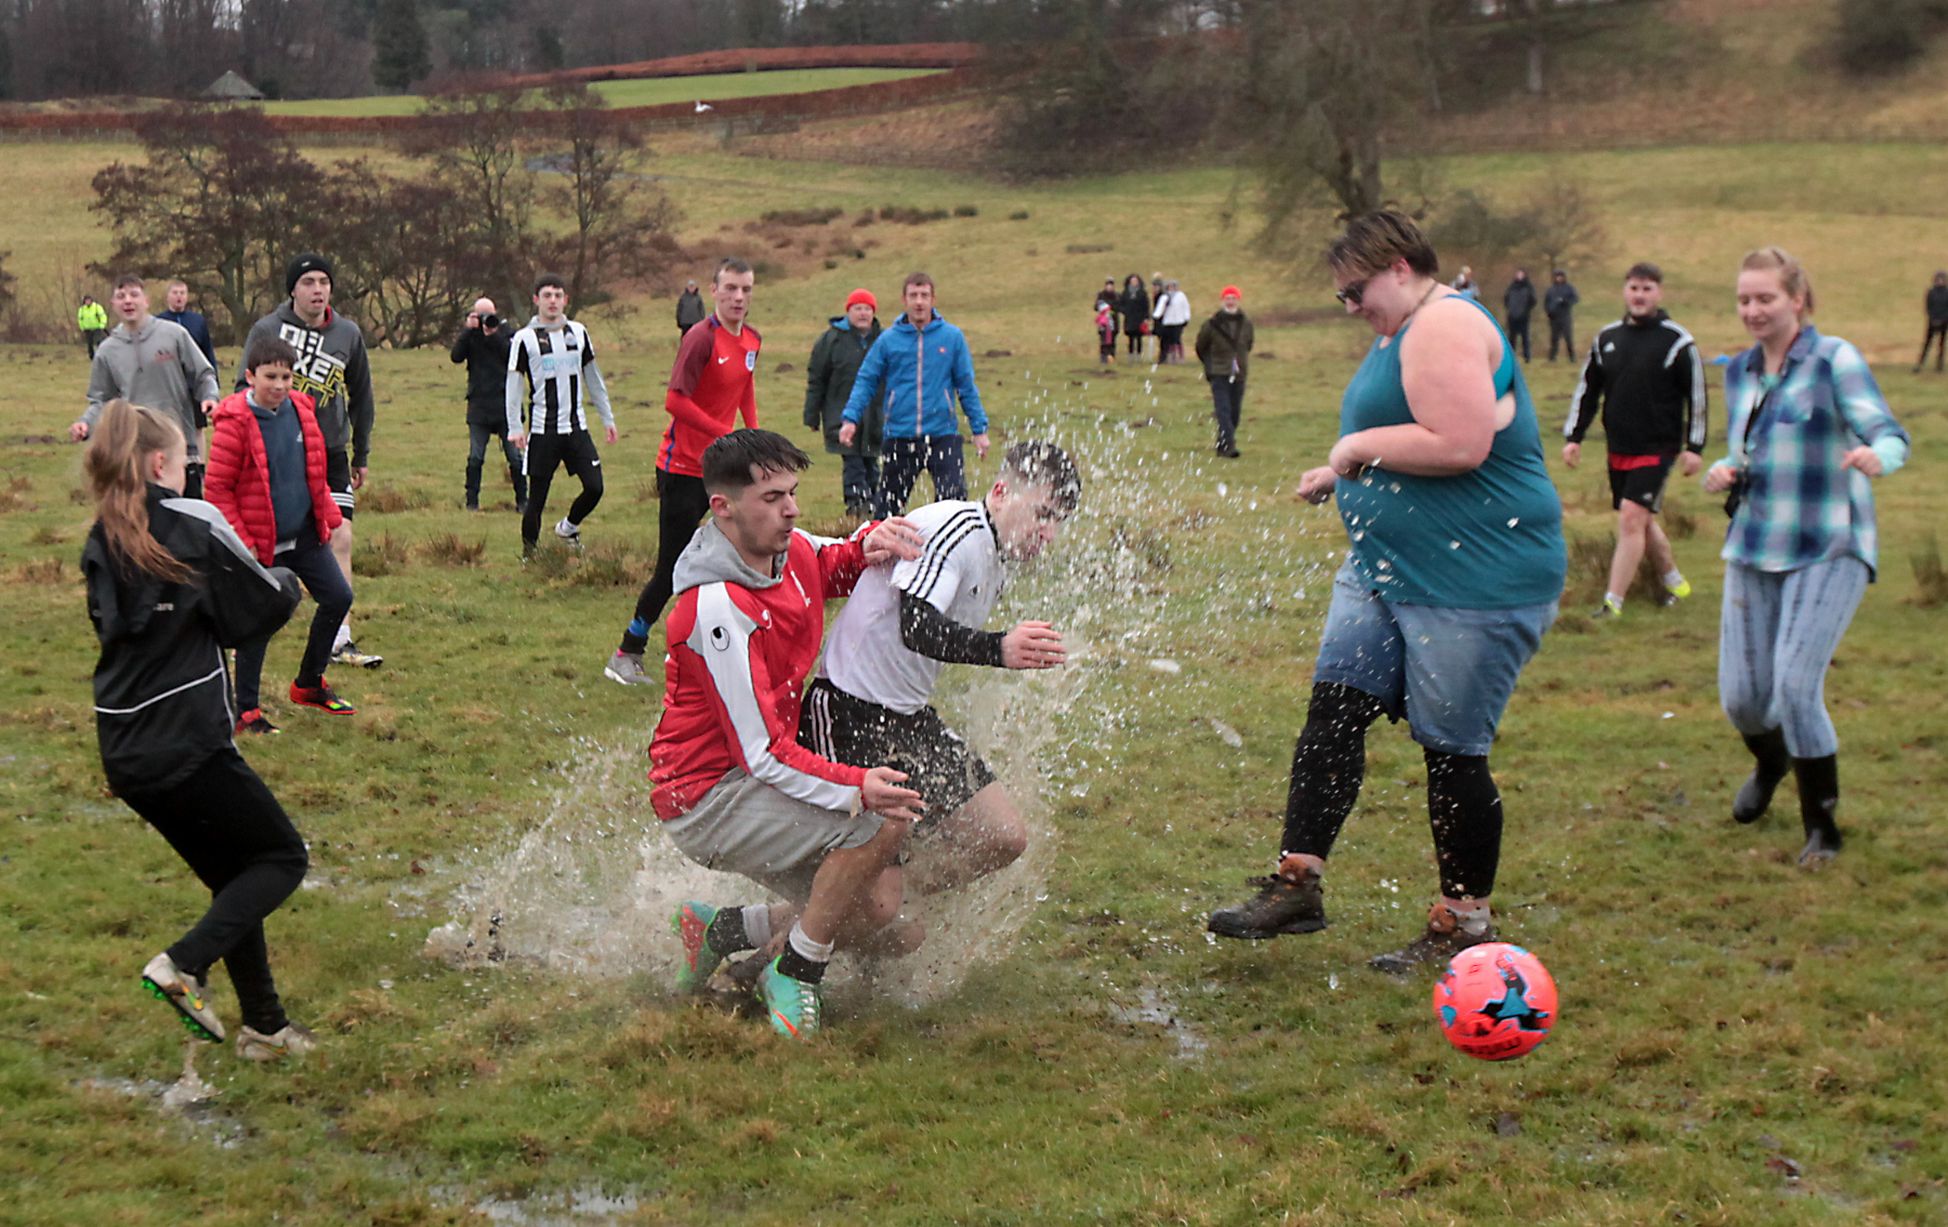 Shrove Tuesday football match in Alnwick - Chronicle Live